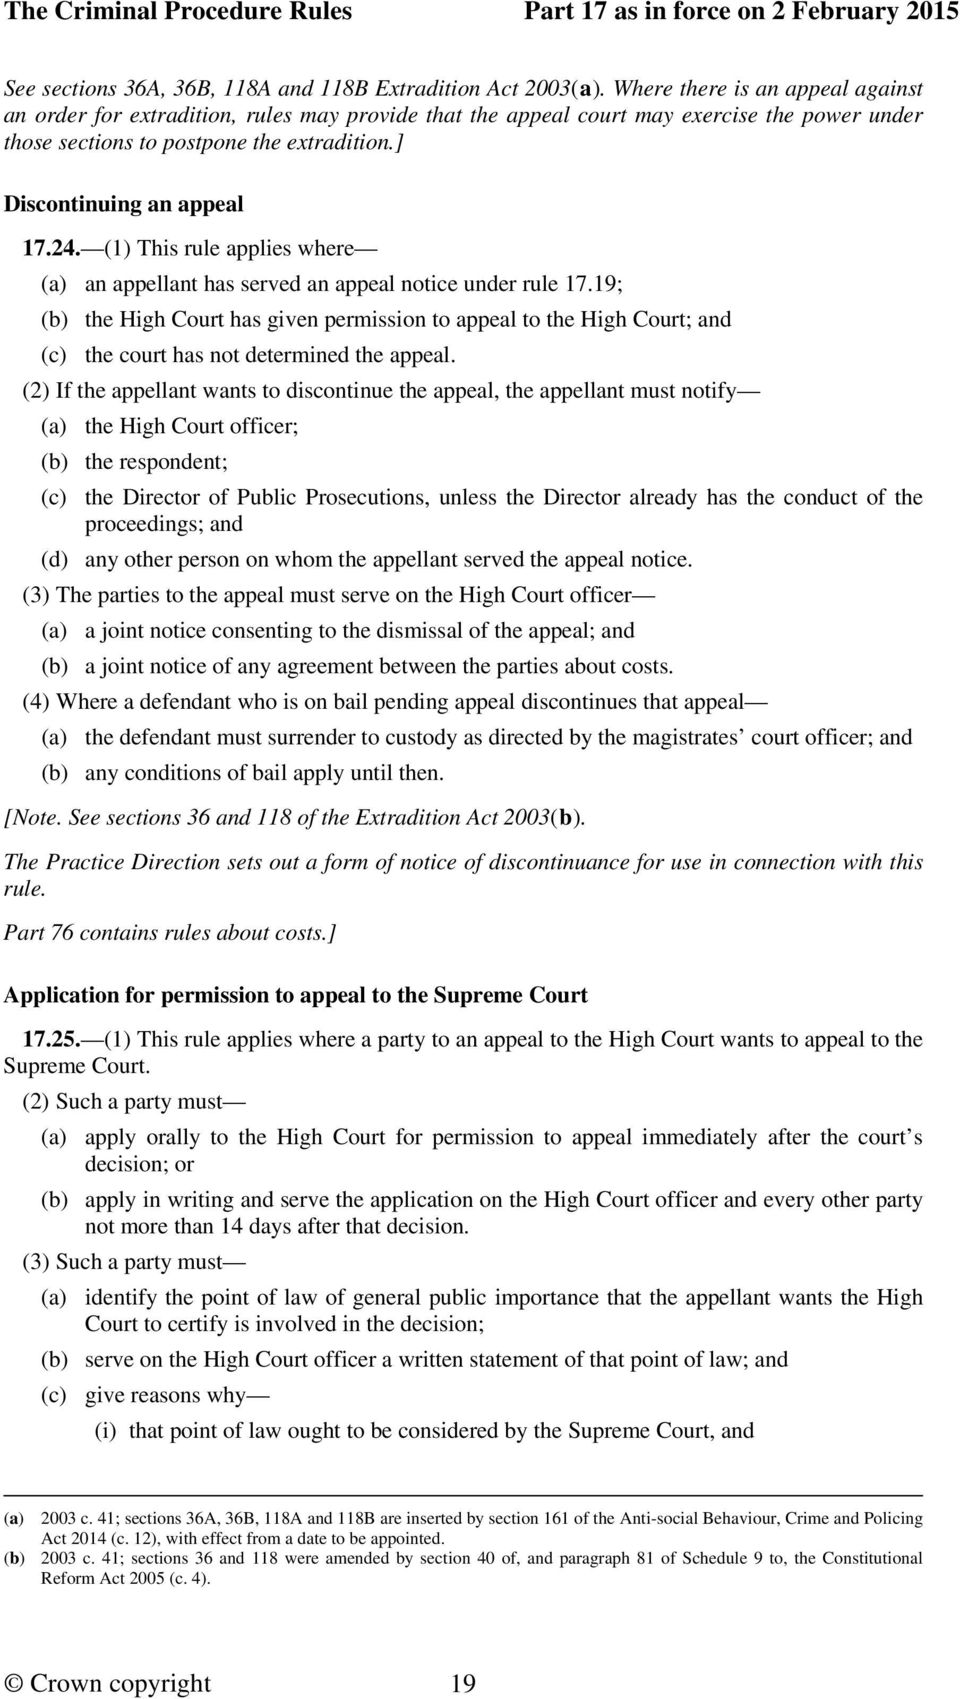 24. (1) This rule applies where (a) an appellant has served an appeal notice under rule 17.